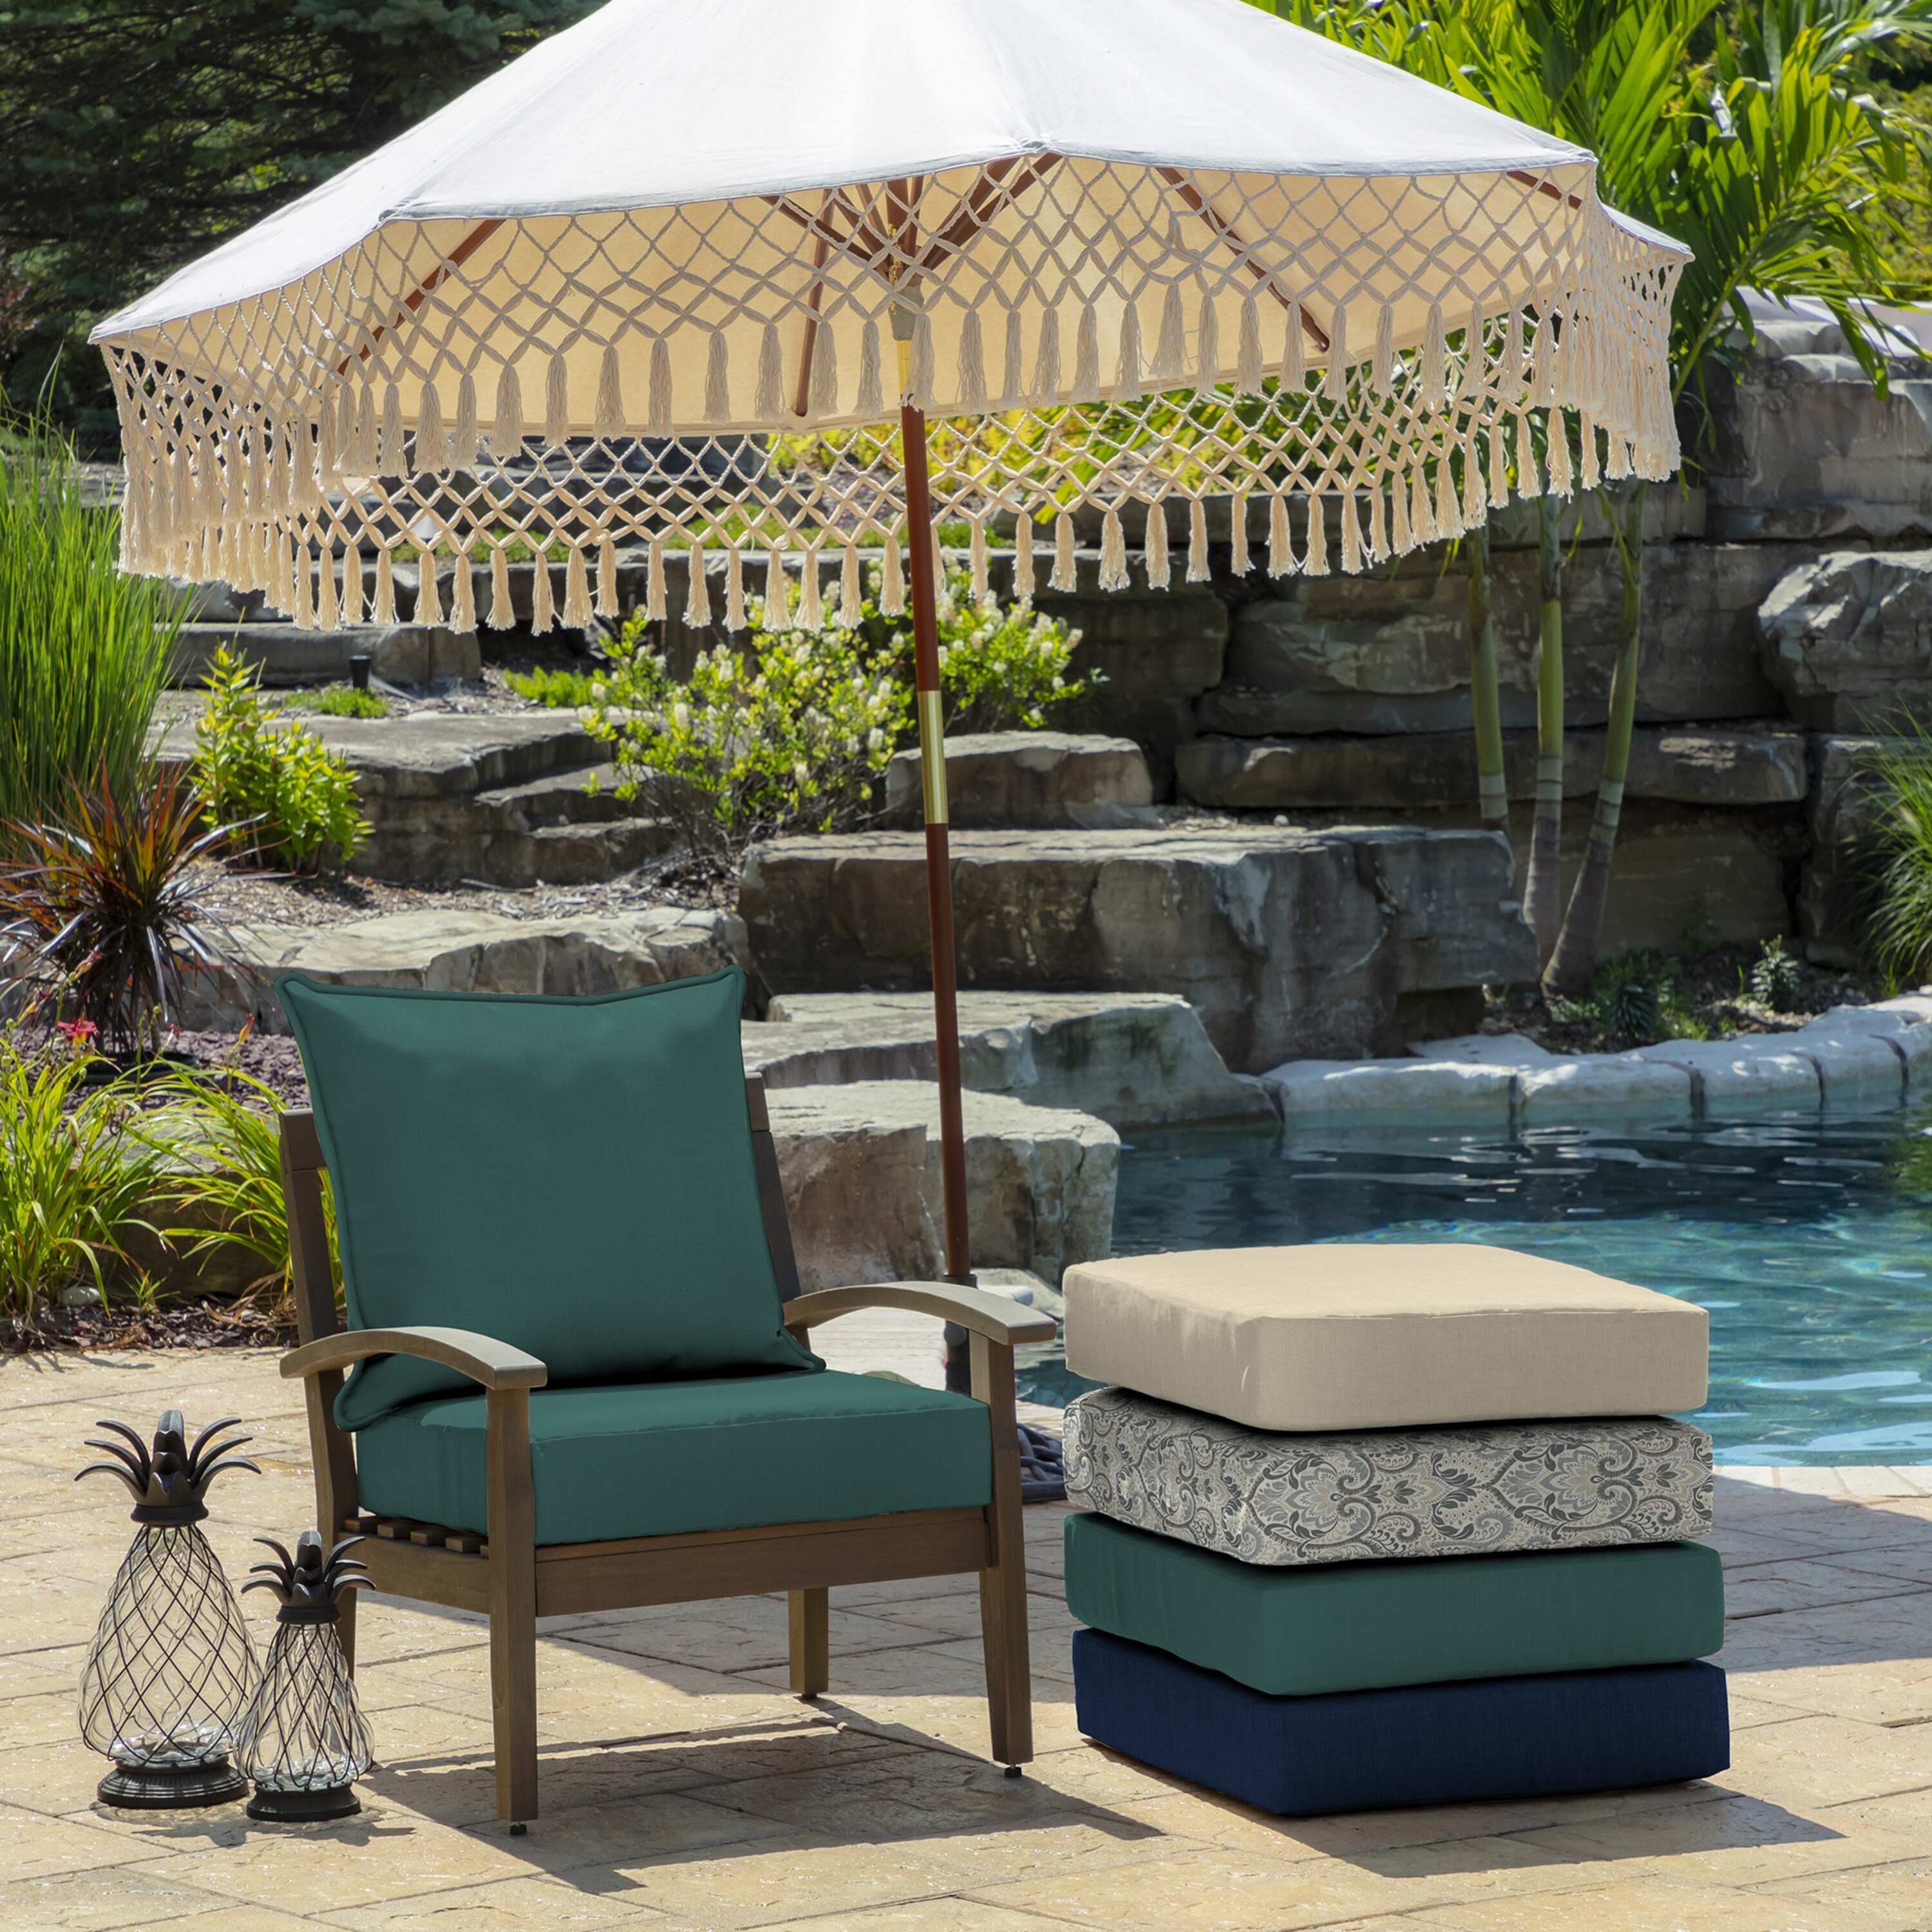 Arden Selections Outdoor Deep Seating Cushion Set 24 x 24 - 46.5"L x 24"W